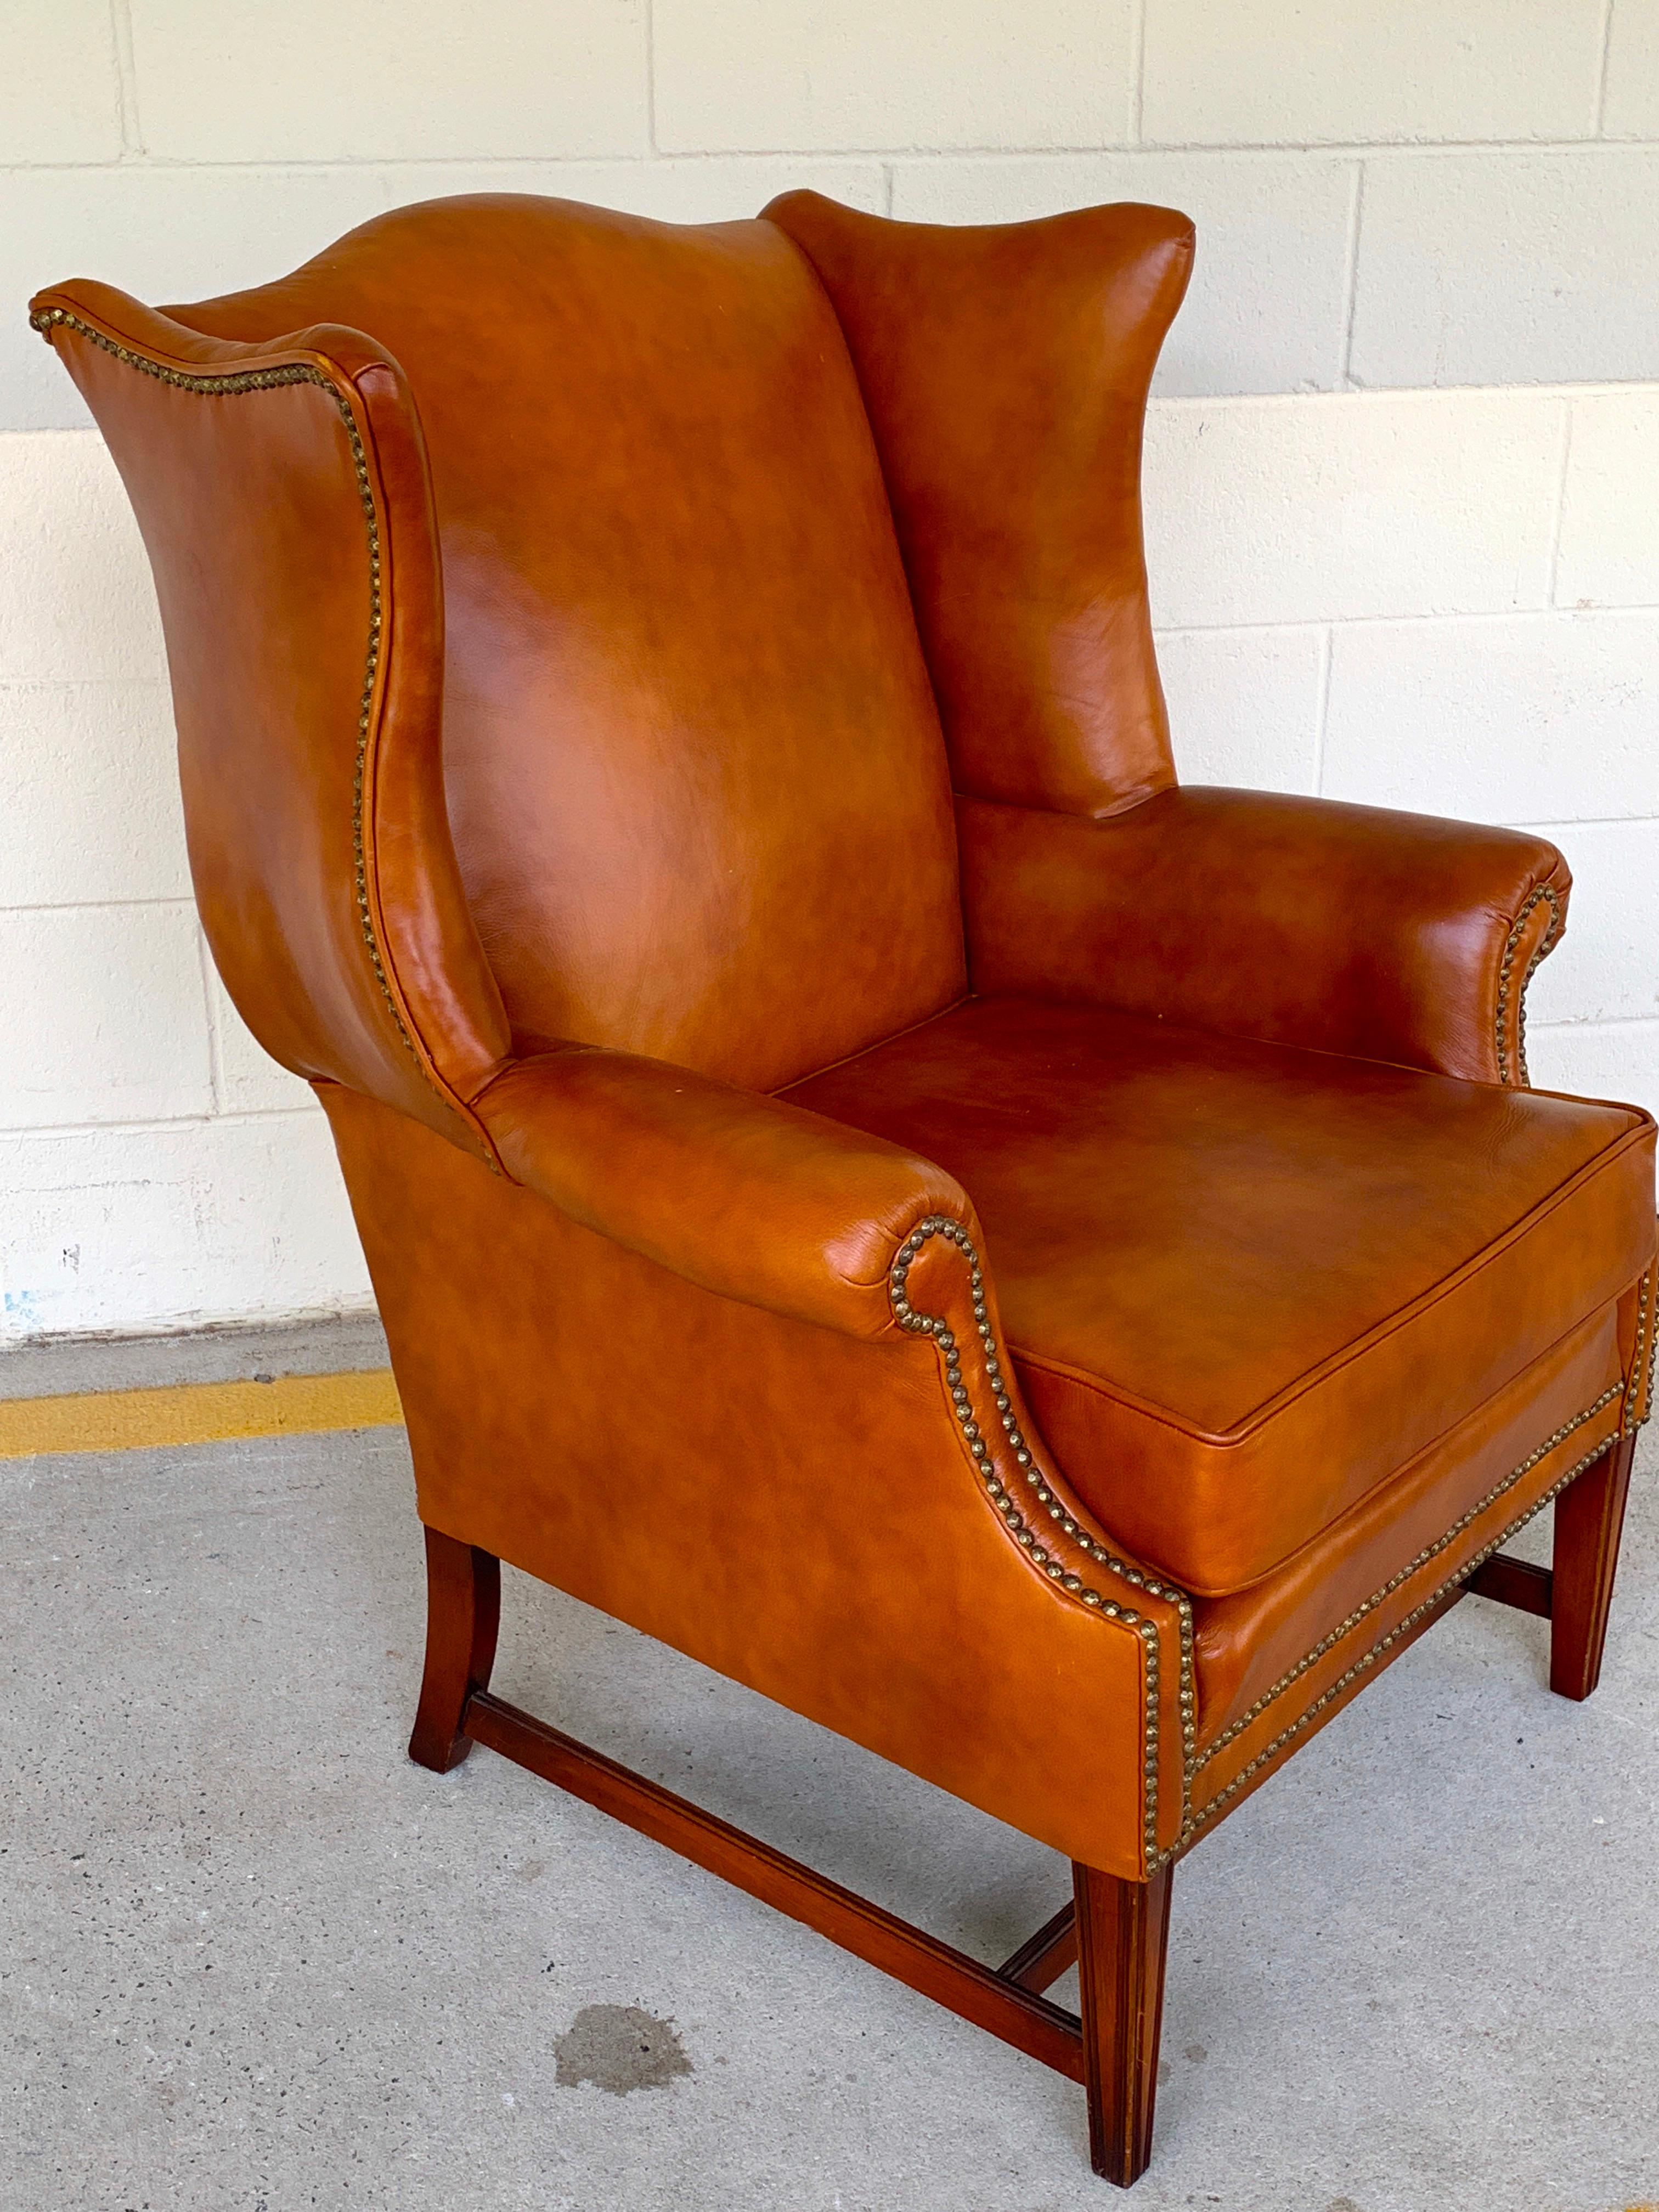 English Saddle Leather Mahogany Wingback Chair In Good Condition For Sale In Atlanta, GA